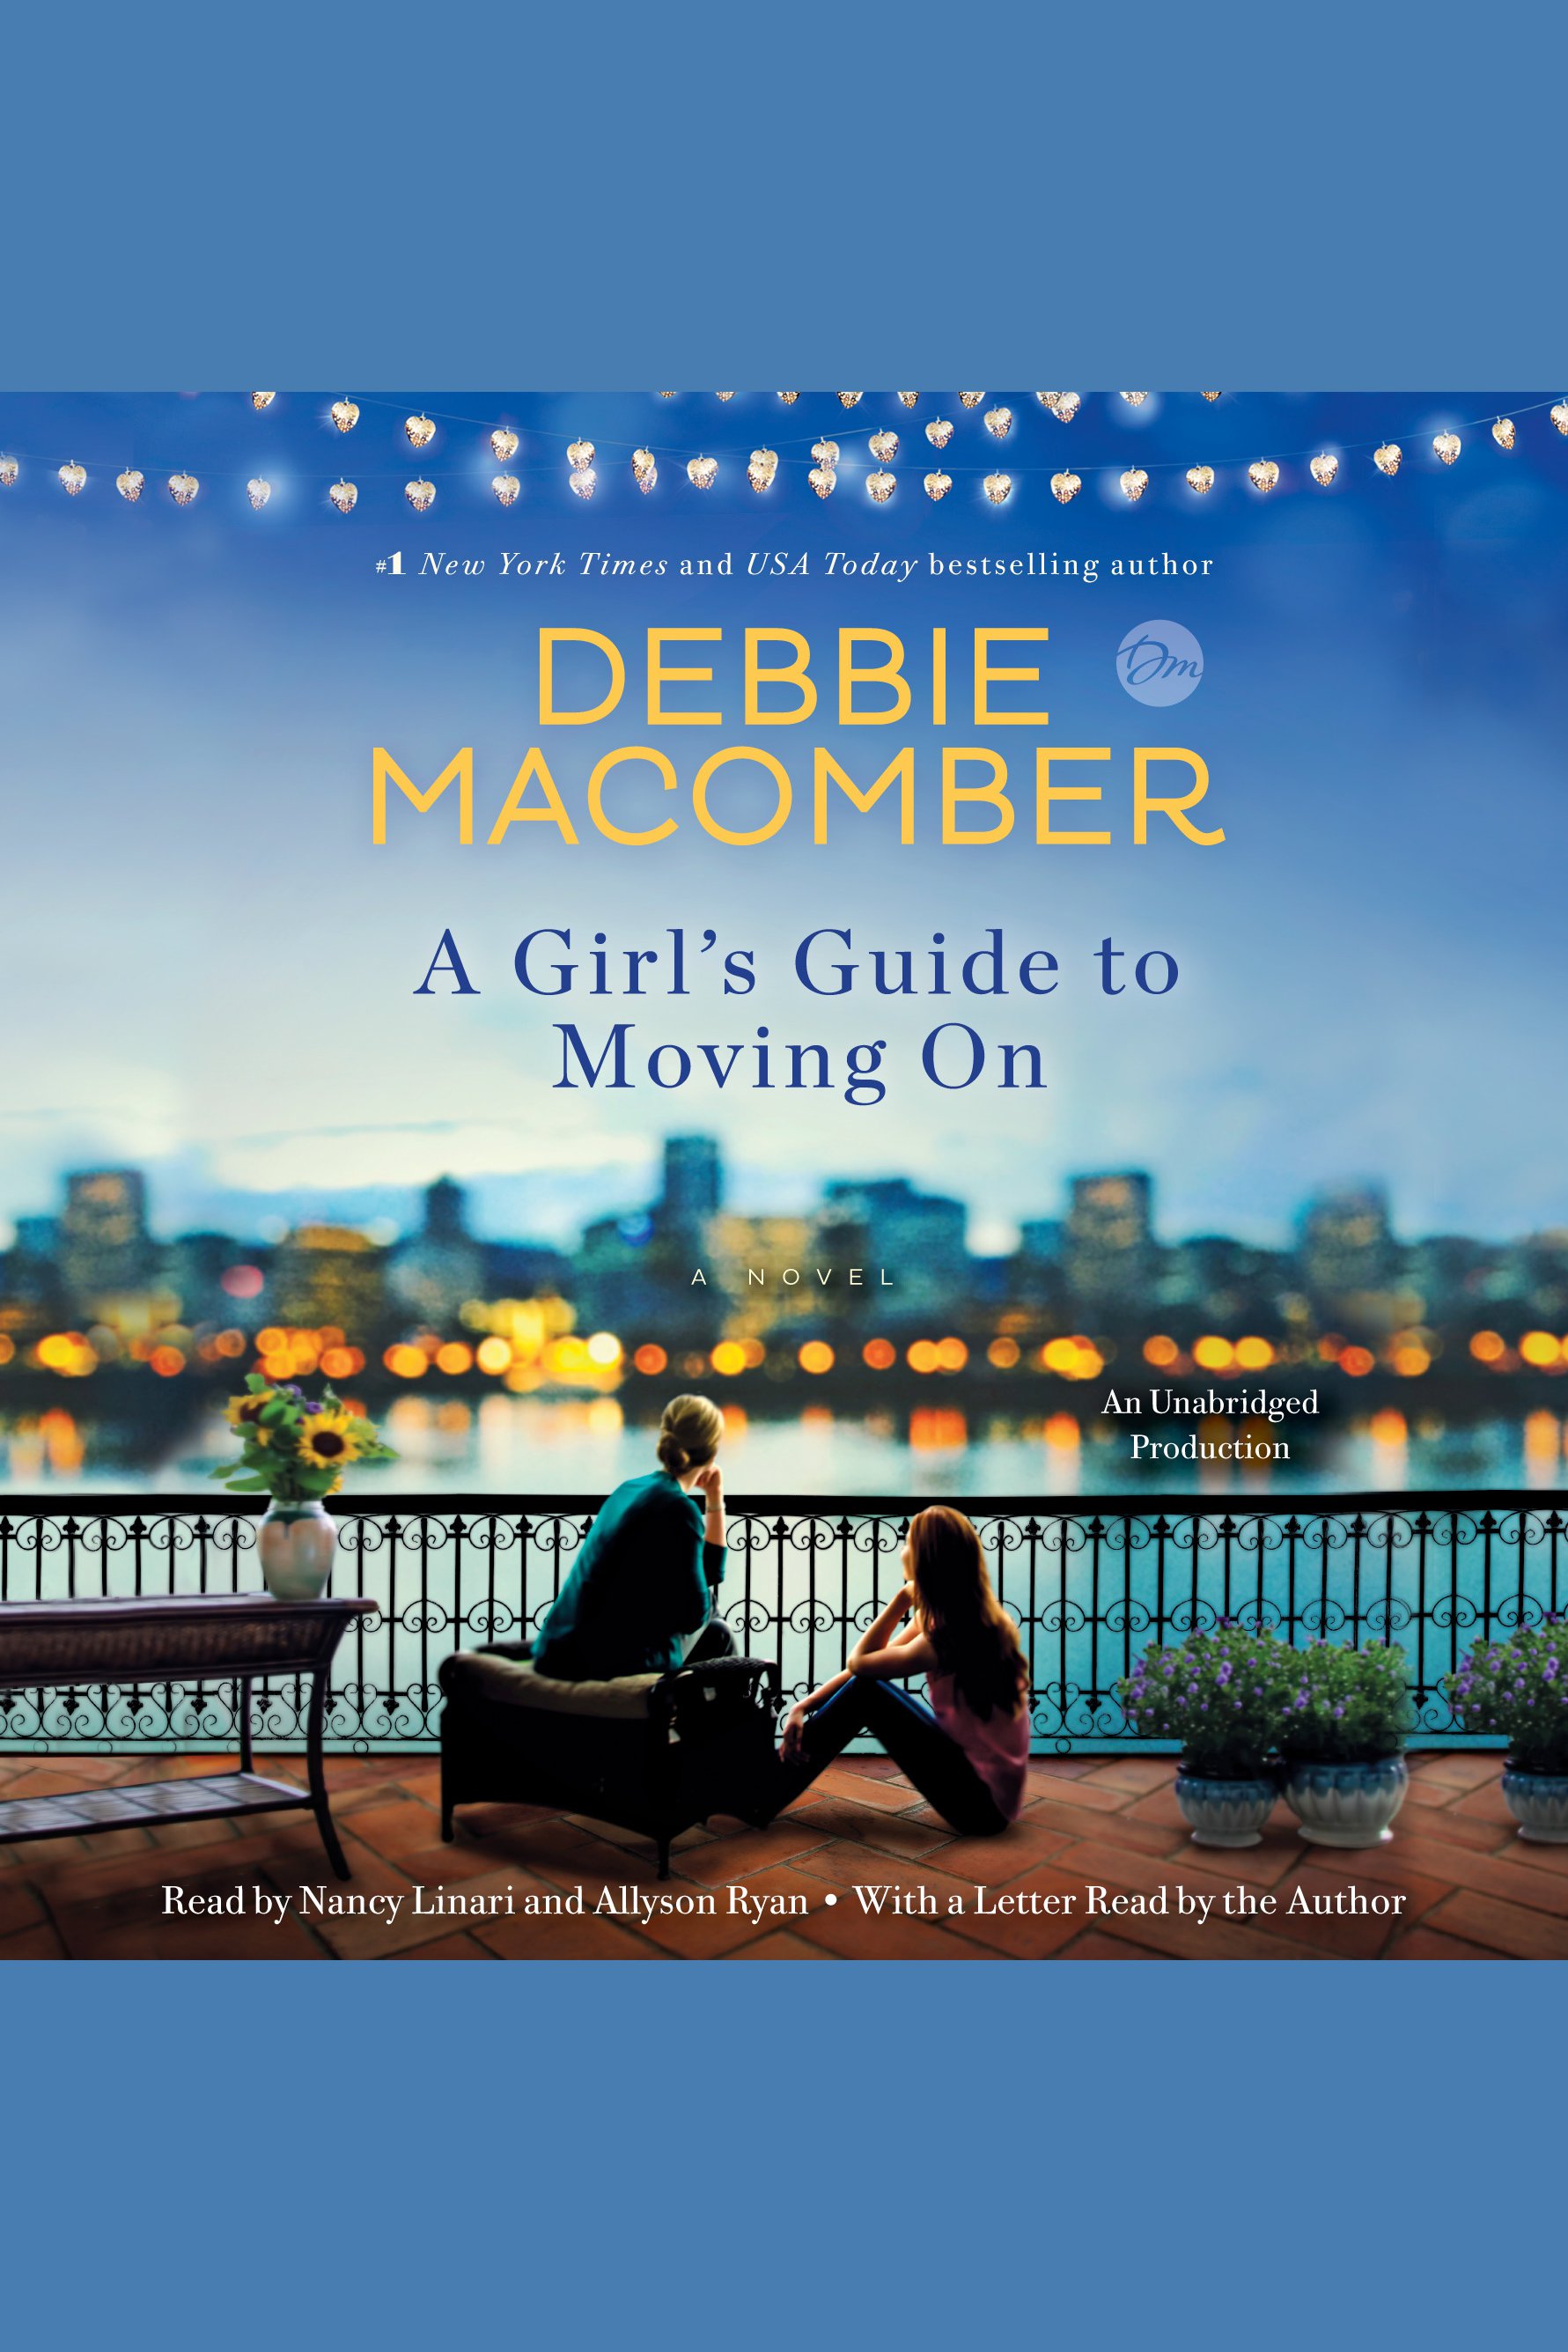 Umschlagbild für Girl's Guide to Moving On, A [electronic resource] : A Novel